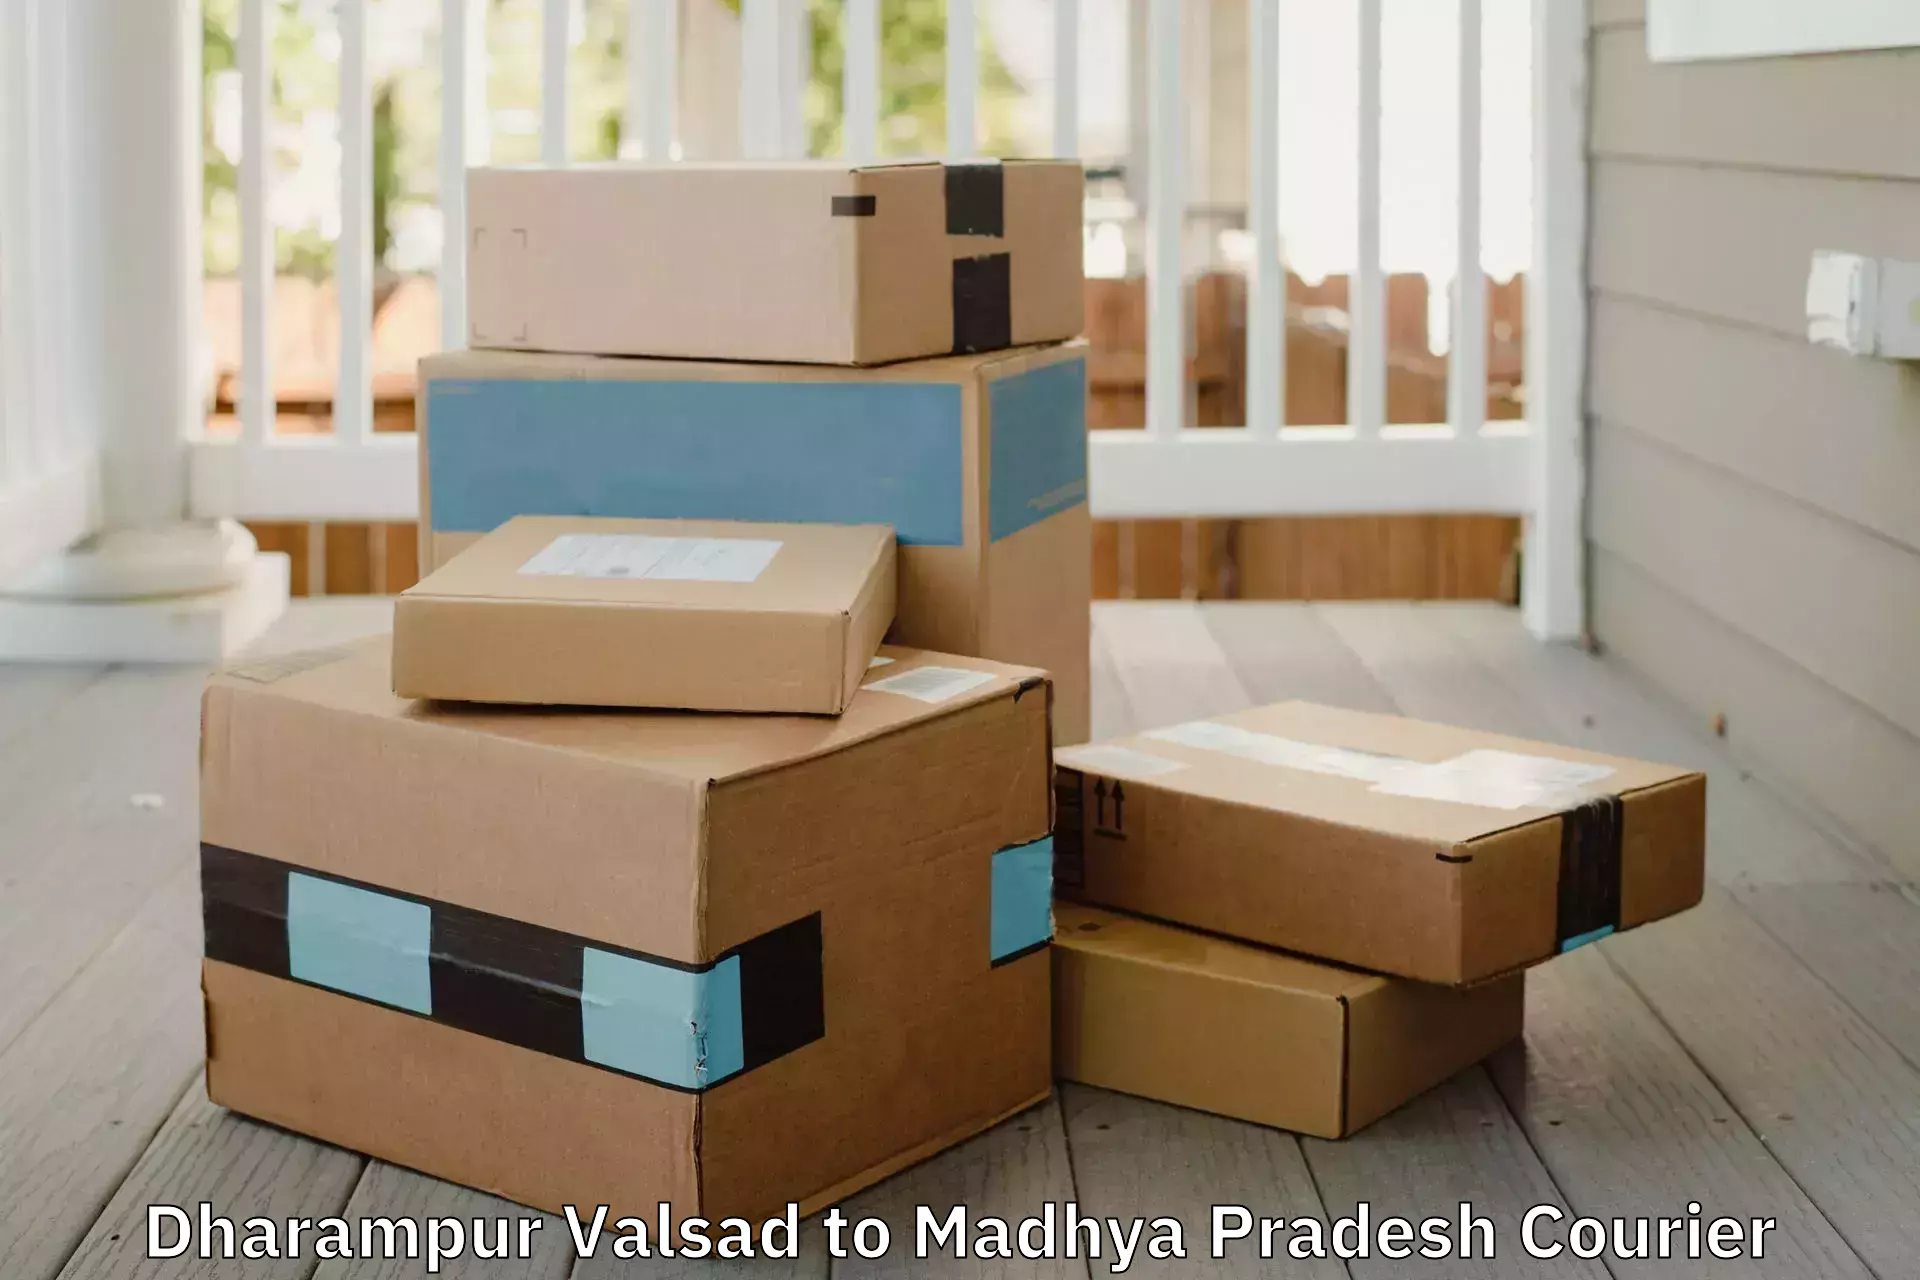 Reliable relocation services Dharampur Valsad to Jabalpur